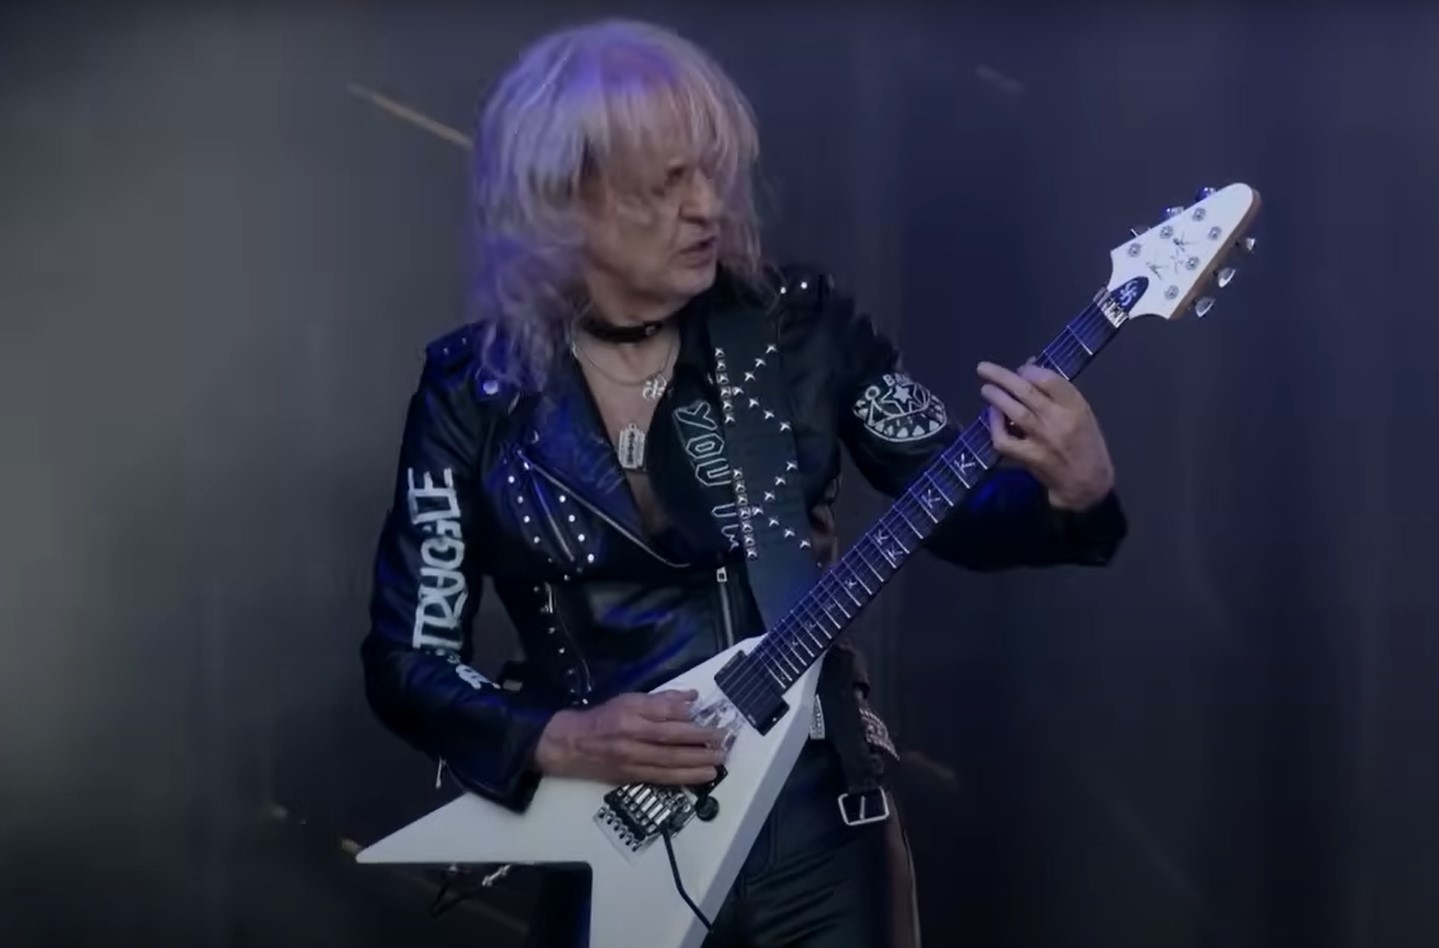 Watch Full Concert Of K.K.'s Priest Performing At The Bloodstock Festival